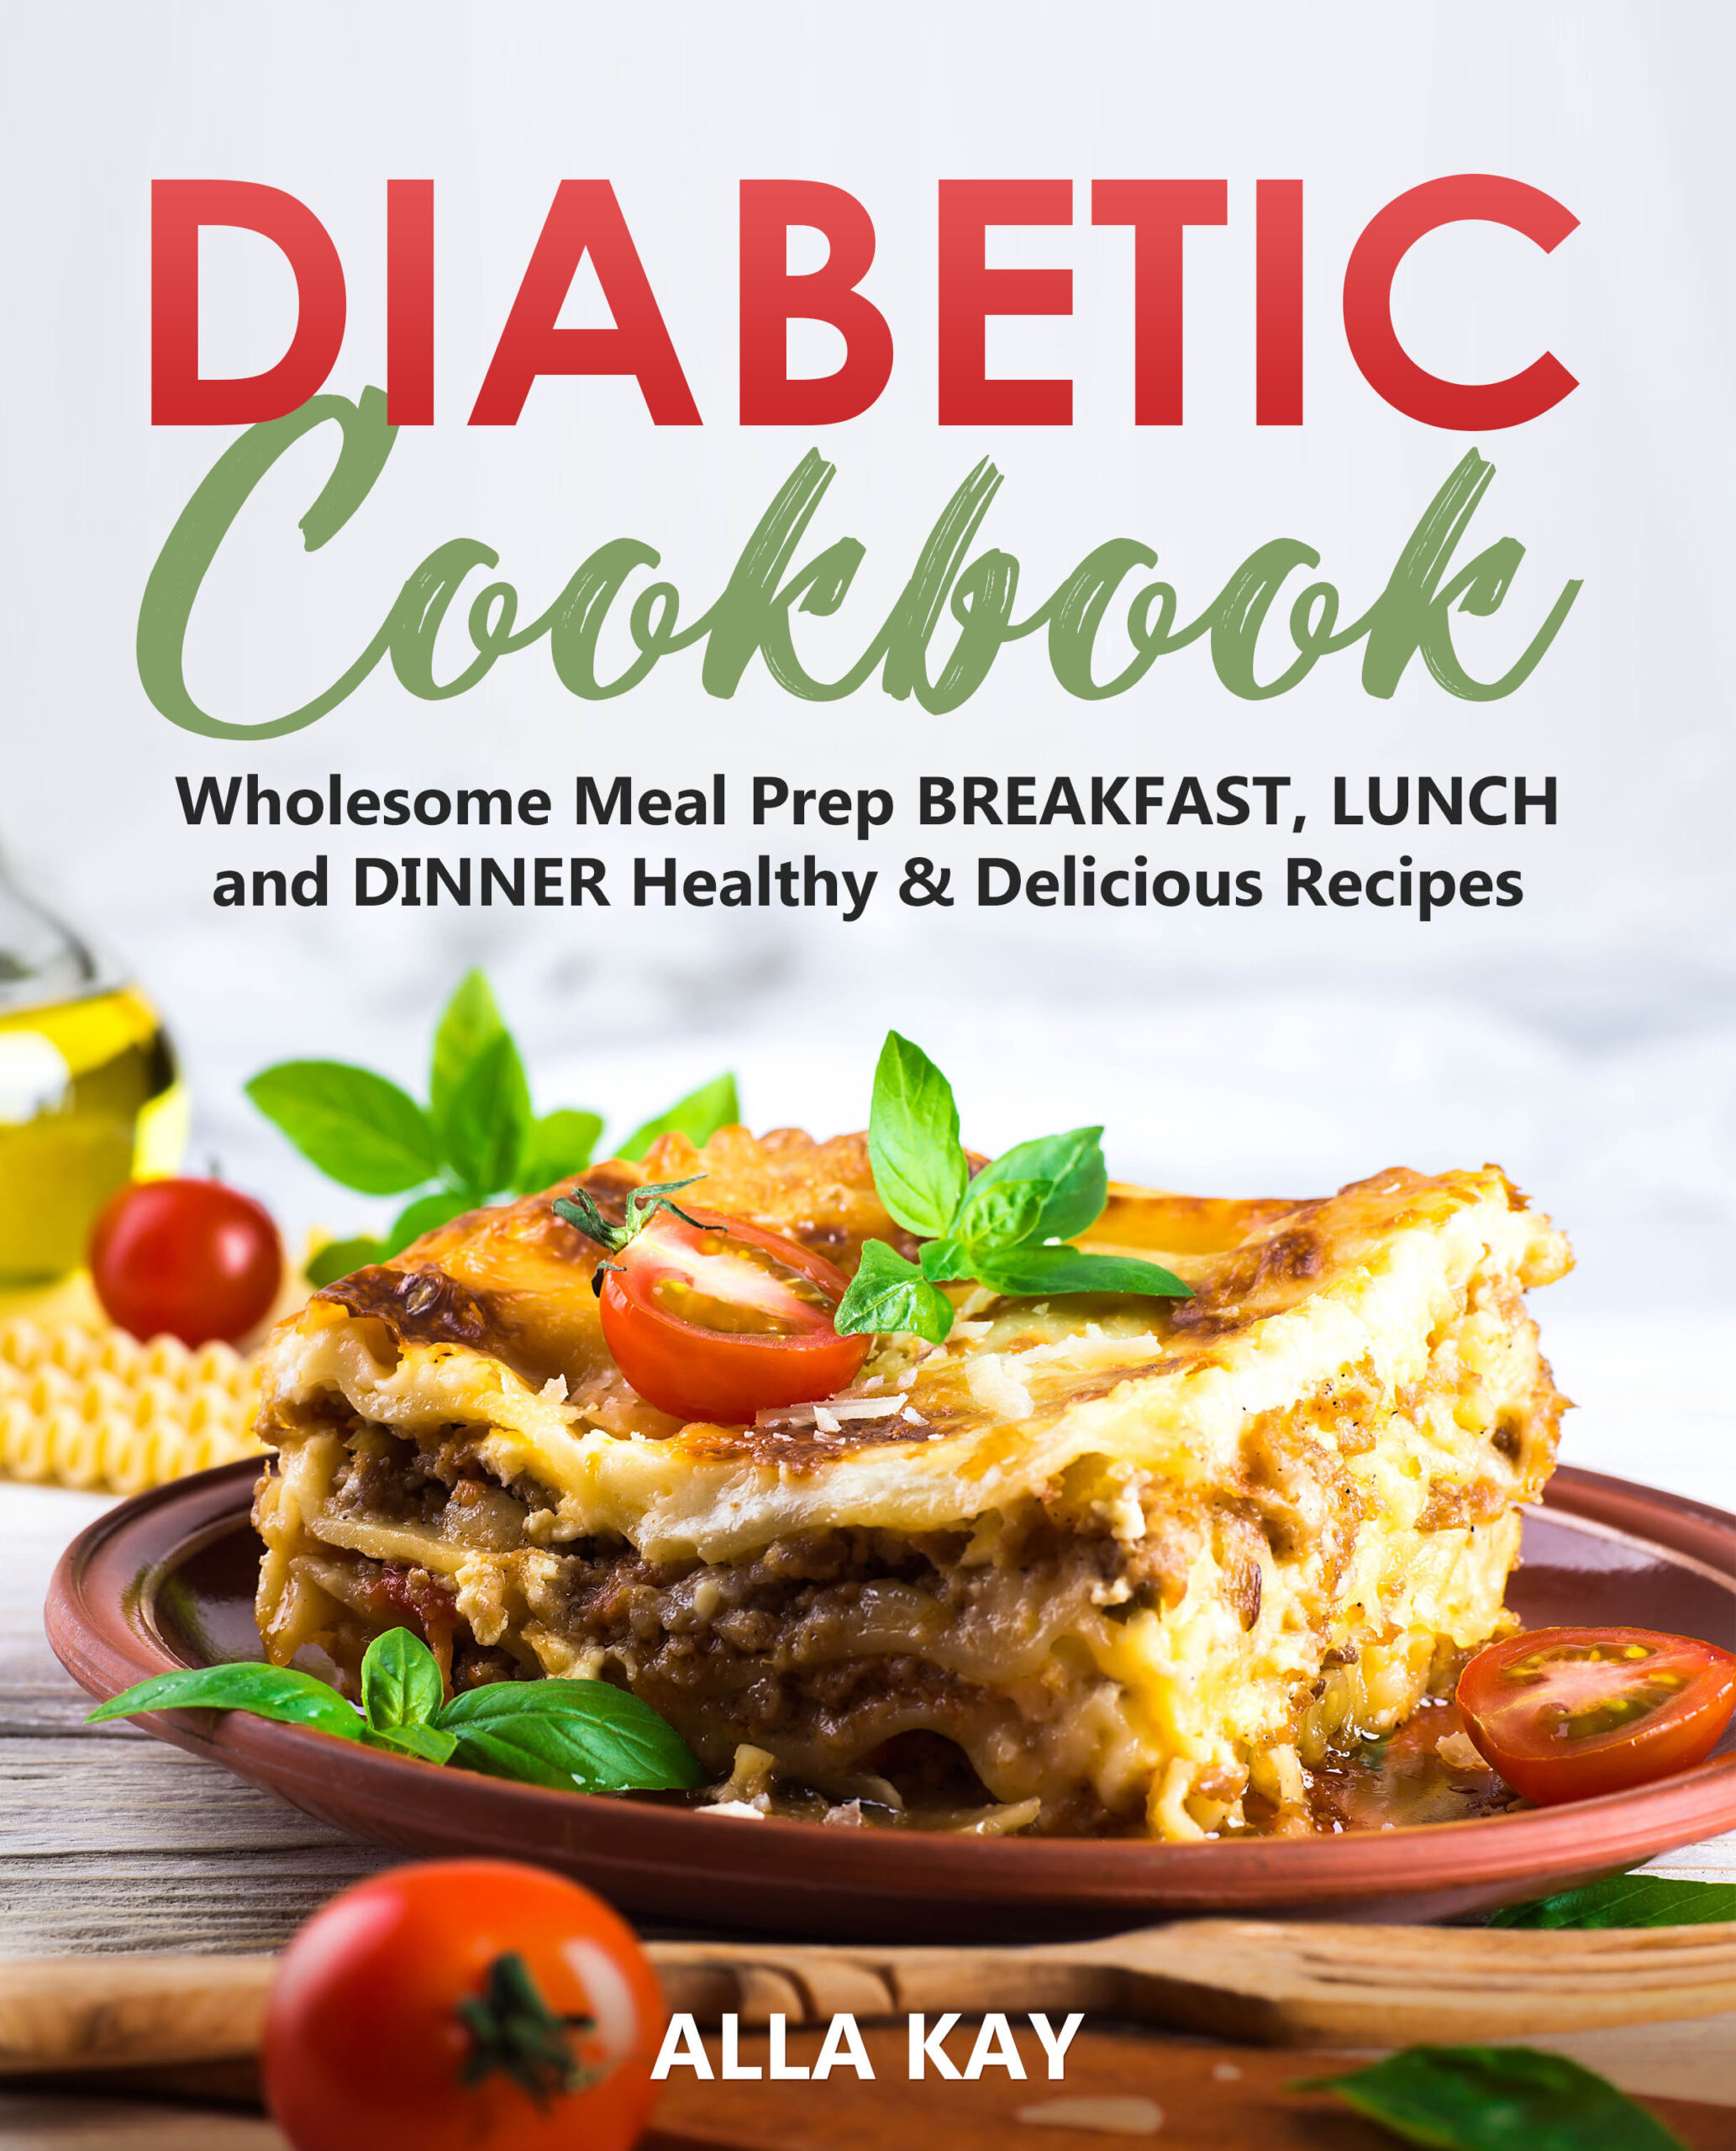 FREE: Diabetic Cookbook: Wholesome Meal Prep BREAKFAST, LUNCH and DINNER Healthy & Delicious Recipes by Alla Kay